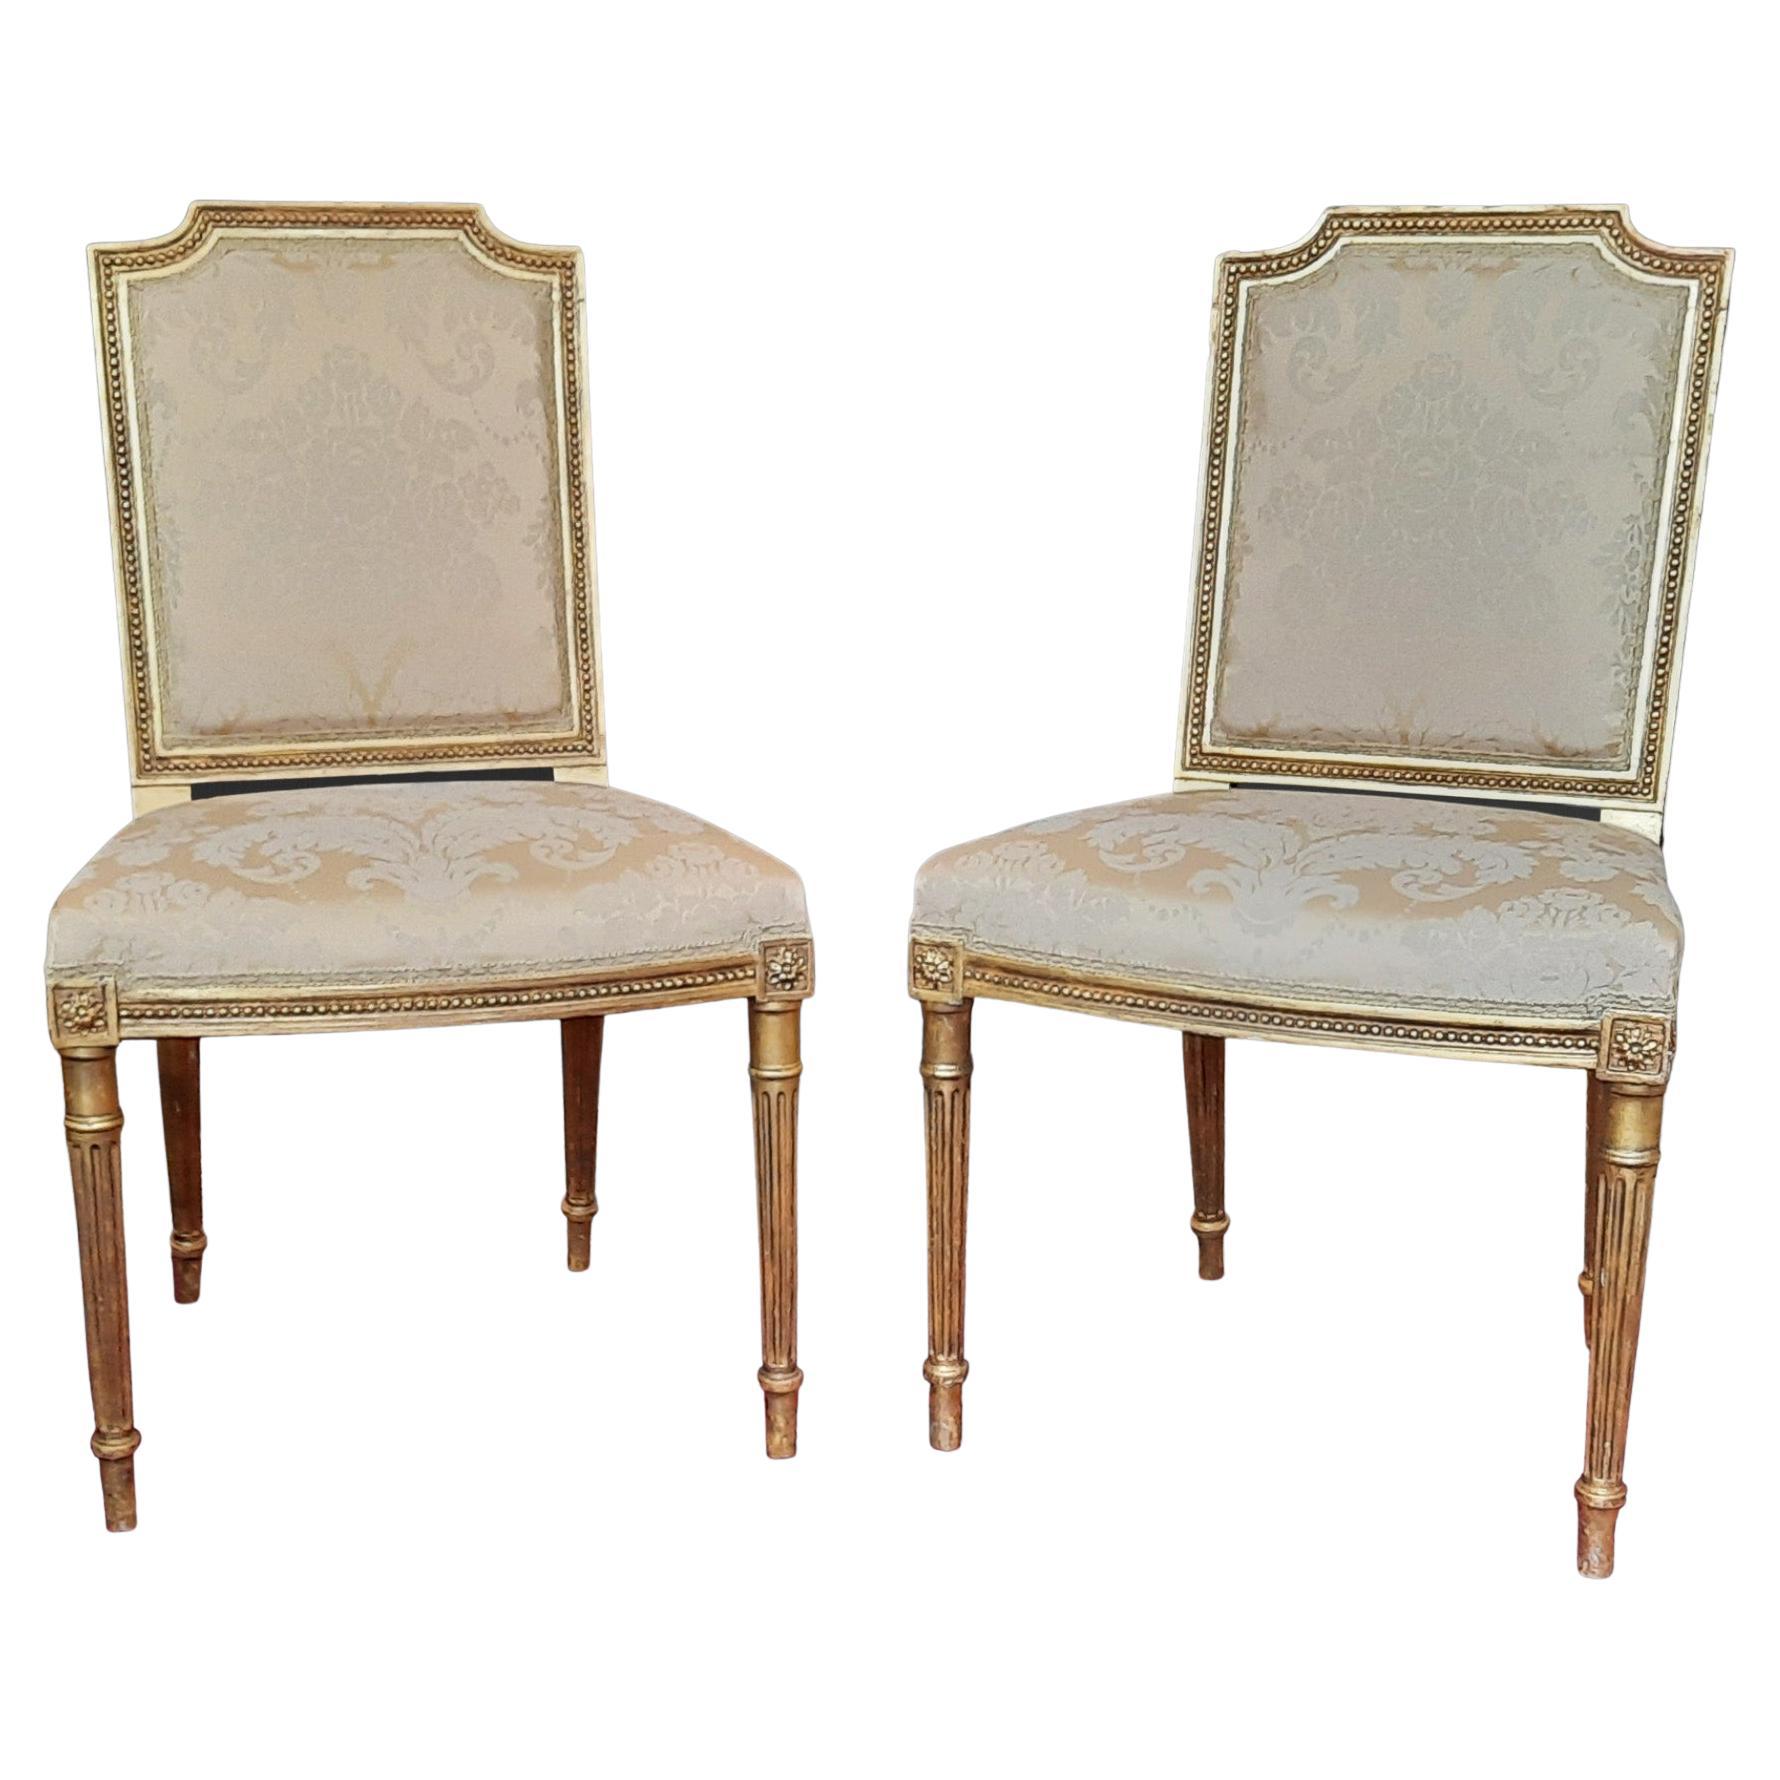 Pair of Victorian Giltwood Salon Chairs For Sale